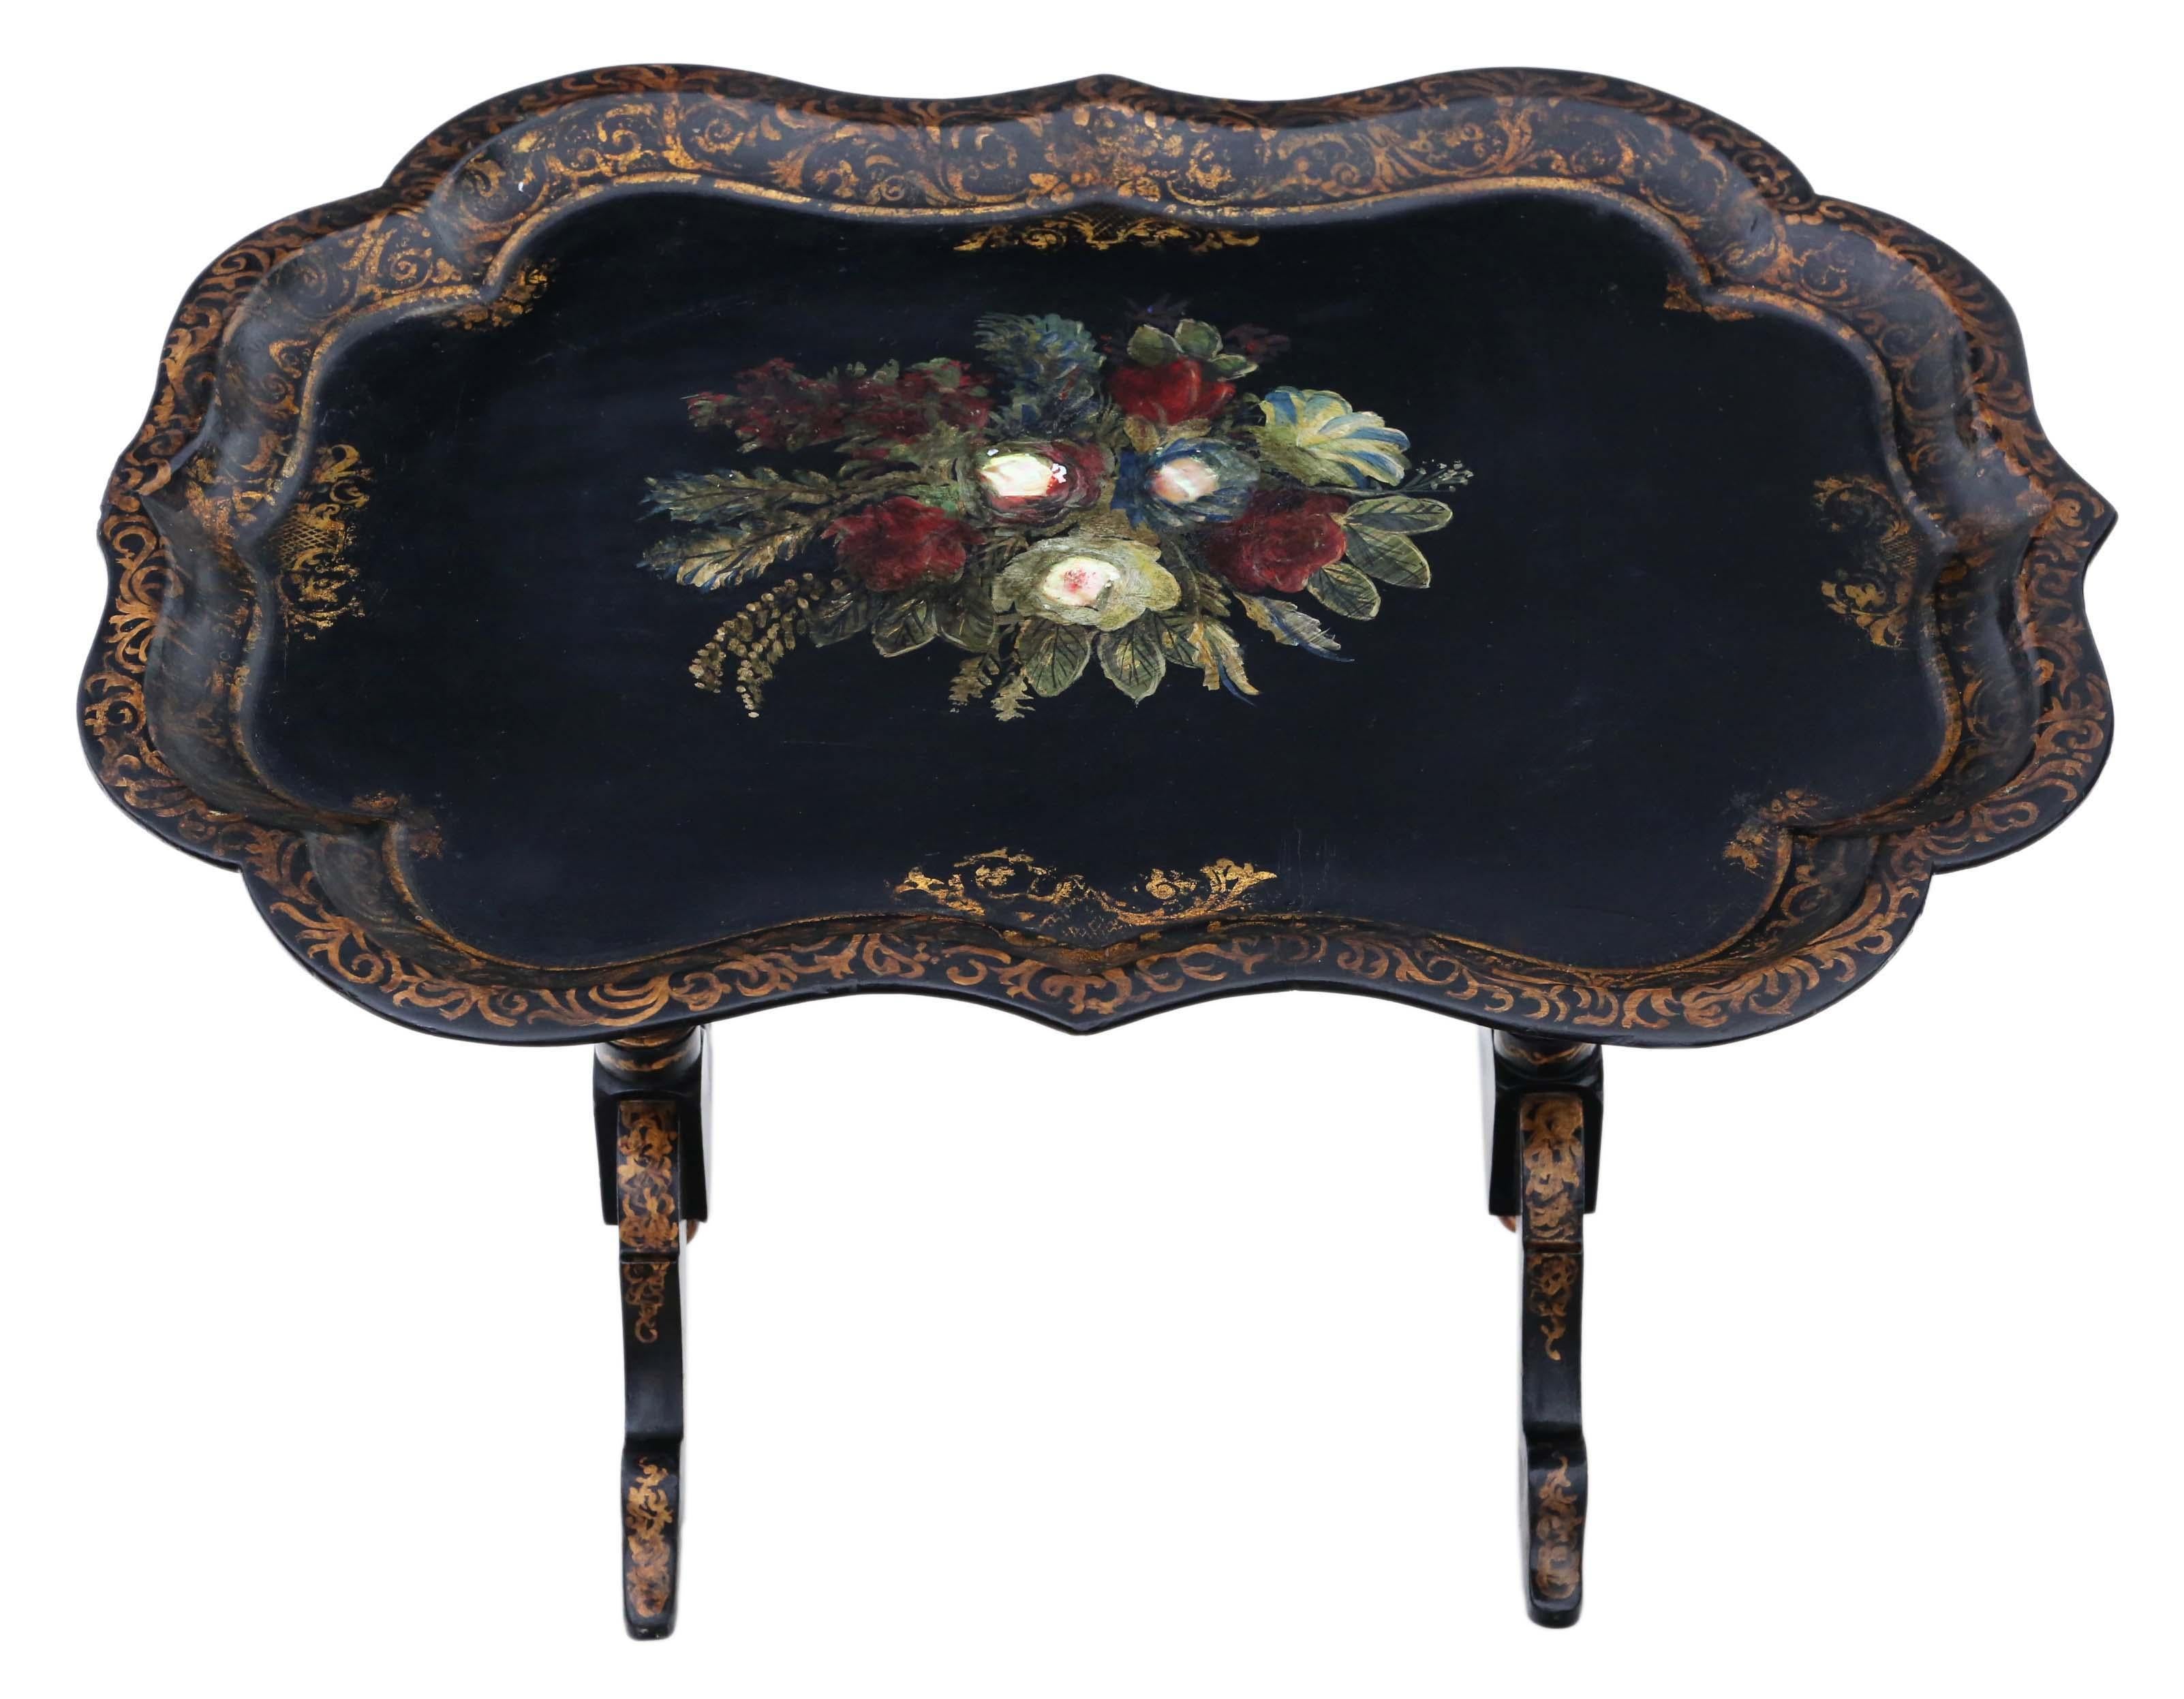 Antique quality Victorian tilt-top decorated black lacquer tray top table. Dates from circa 1880.
 
Would make a great coffee table. No loose joints.
Very attractive, with lovely proportions and styling. No woodworm.

Lovely age color and